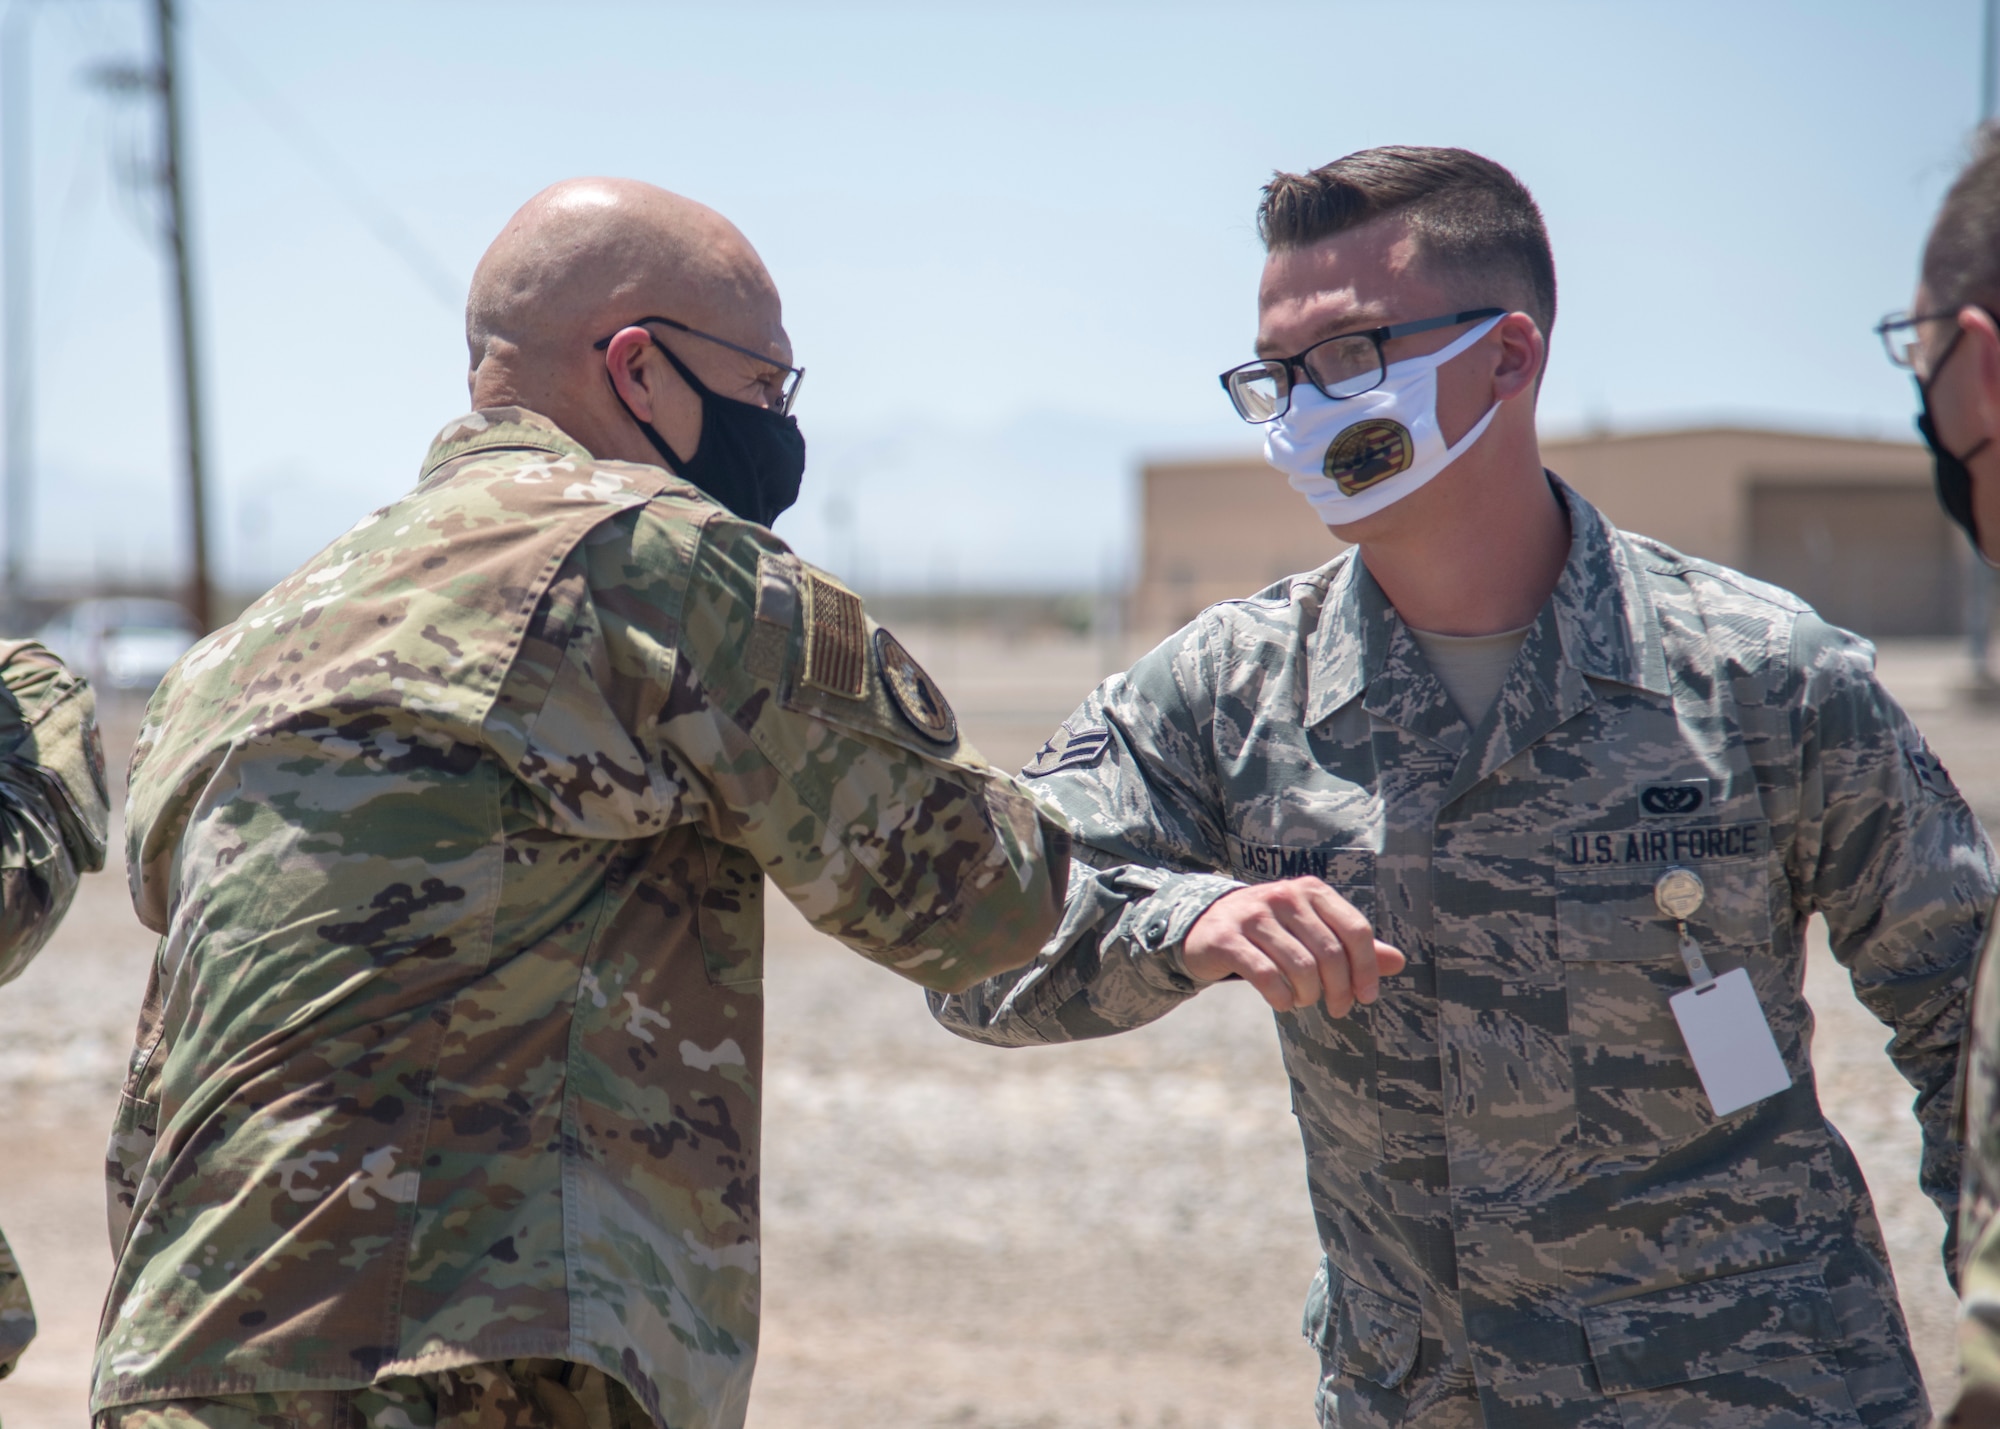 Gen. Arnold W. Bunch Jr., left, Air Force Materiel Command commander, bumps elbows with Airman 1st Class Jonah Eastman, 635th Materiel Maintenance Squadron electrical power-production journeyman, during Bunch’s Basic Expeditionary Airfield Resources Base tour, June 29, 2020, at the 635th Materiel Maintenance Group on Holloman Air Force Base, N.M. Bunch’s tour included meeting with various Airmen across the installation in order to see how units remained resilient and successful despite challenges derived from the global COVID-19 pandemic. (U.S. Air Force photo by Senior Airman Collette Brooks)